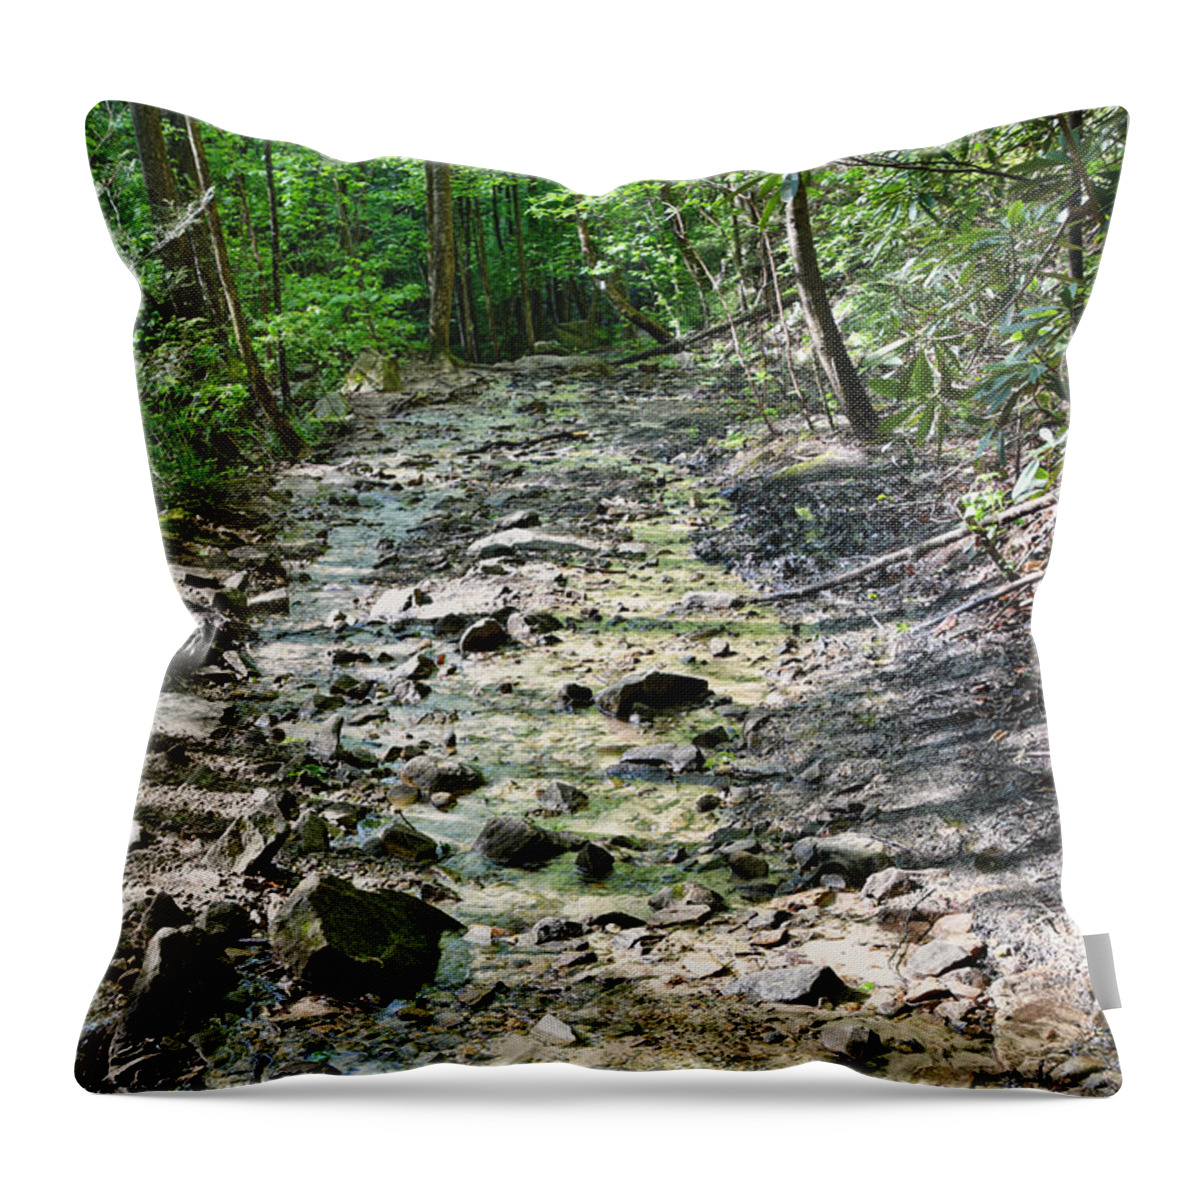 Trail Throw Pillow featuring the photograph Trail Is A Creek by Phil Perkins